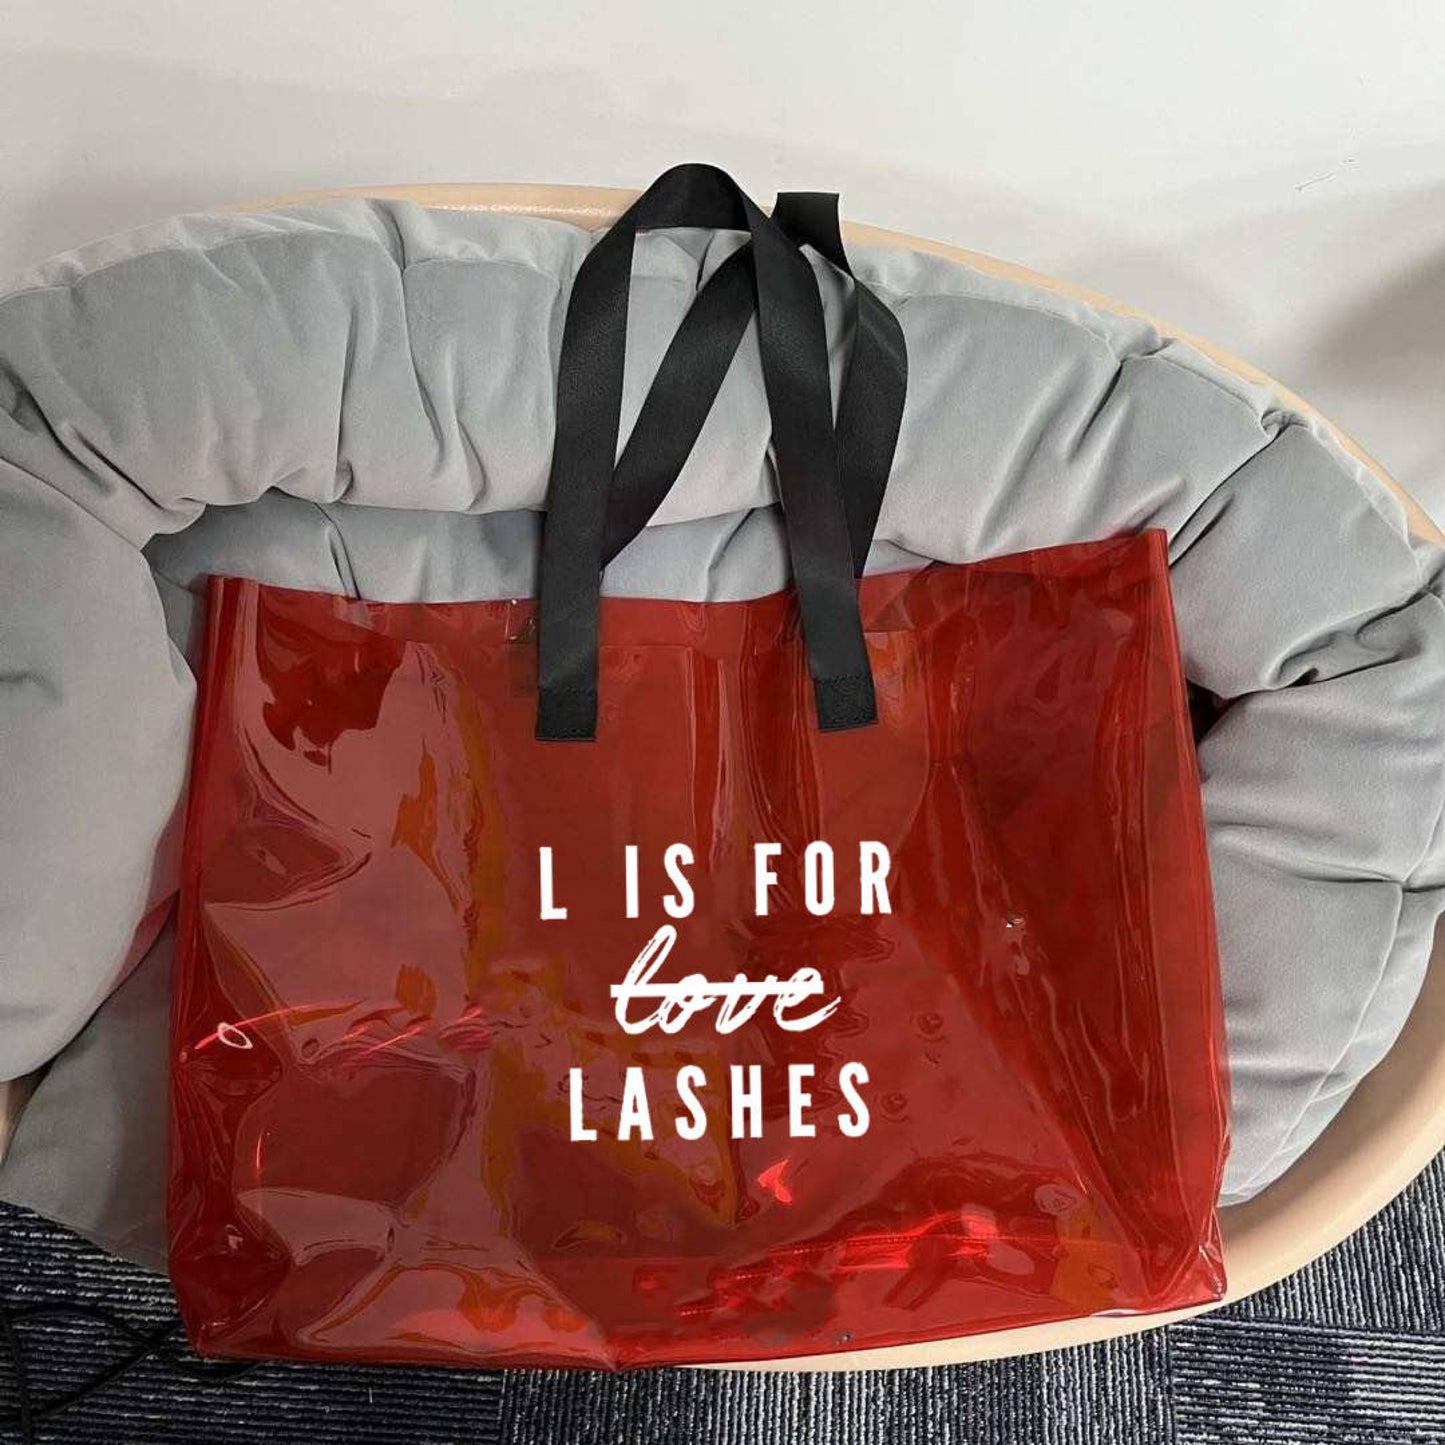 L is for Lashes tote